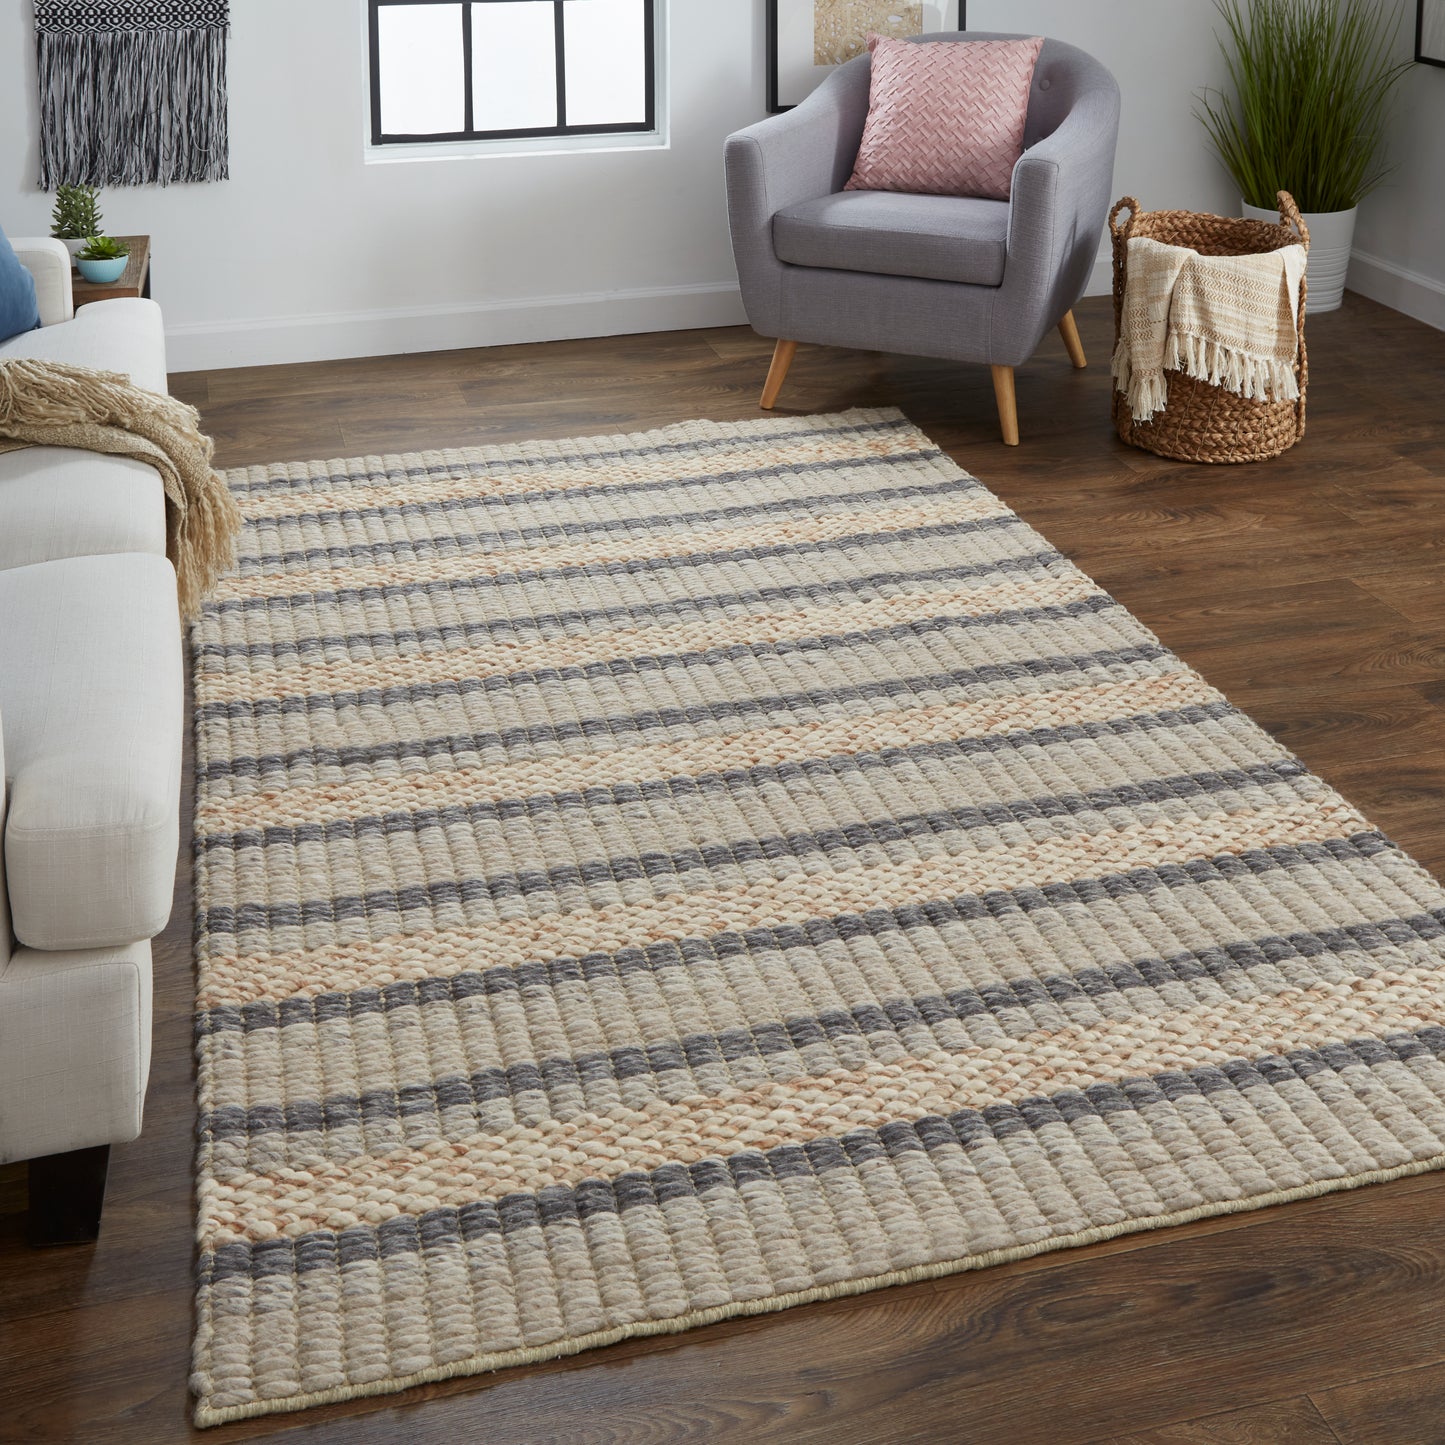 Berkeley 0738F Hand Woven Wool Indoor Area Rug by Feizy Rugs